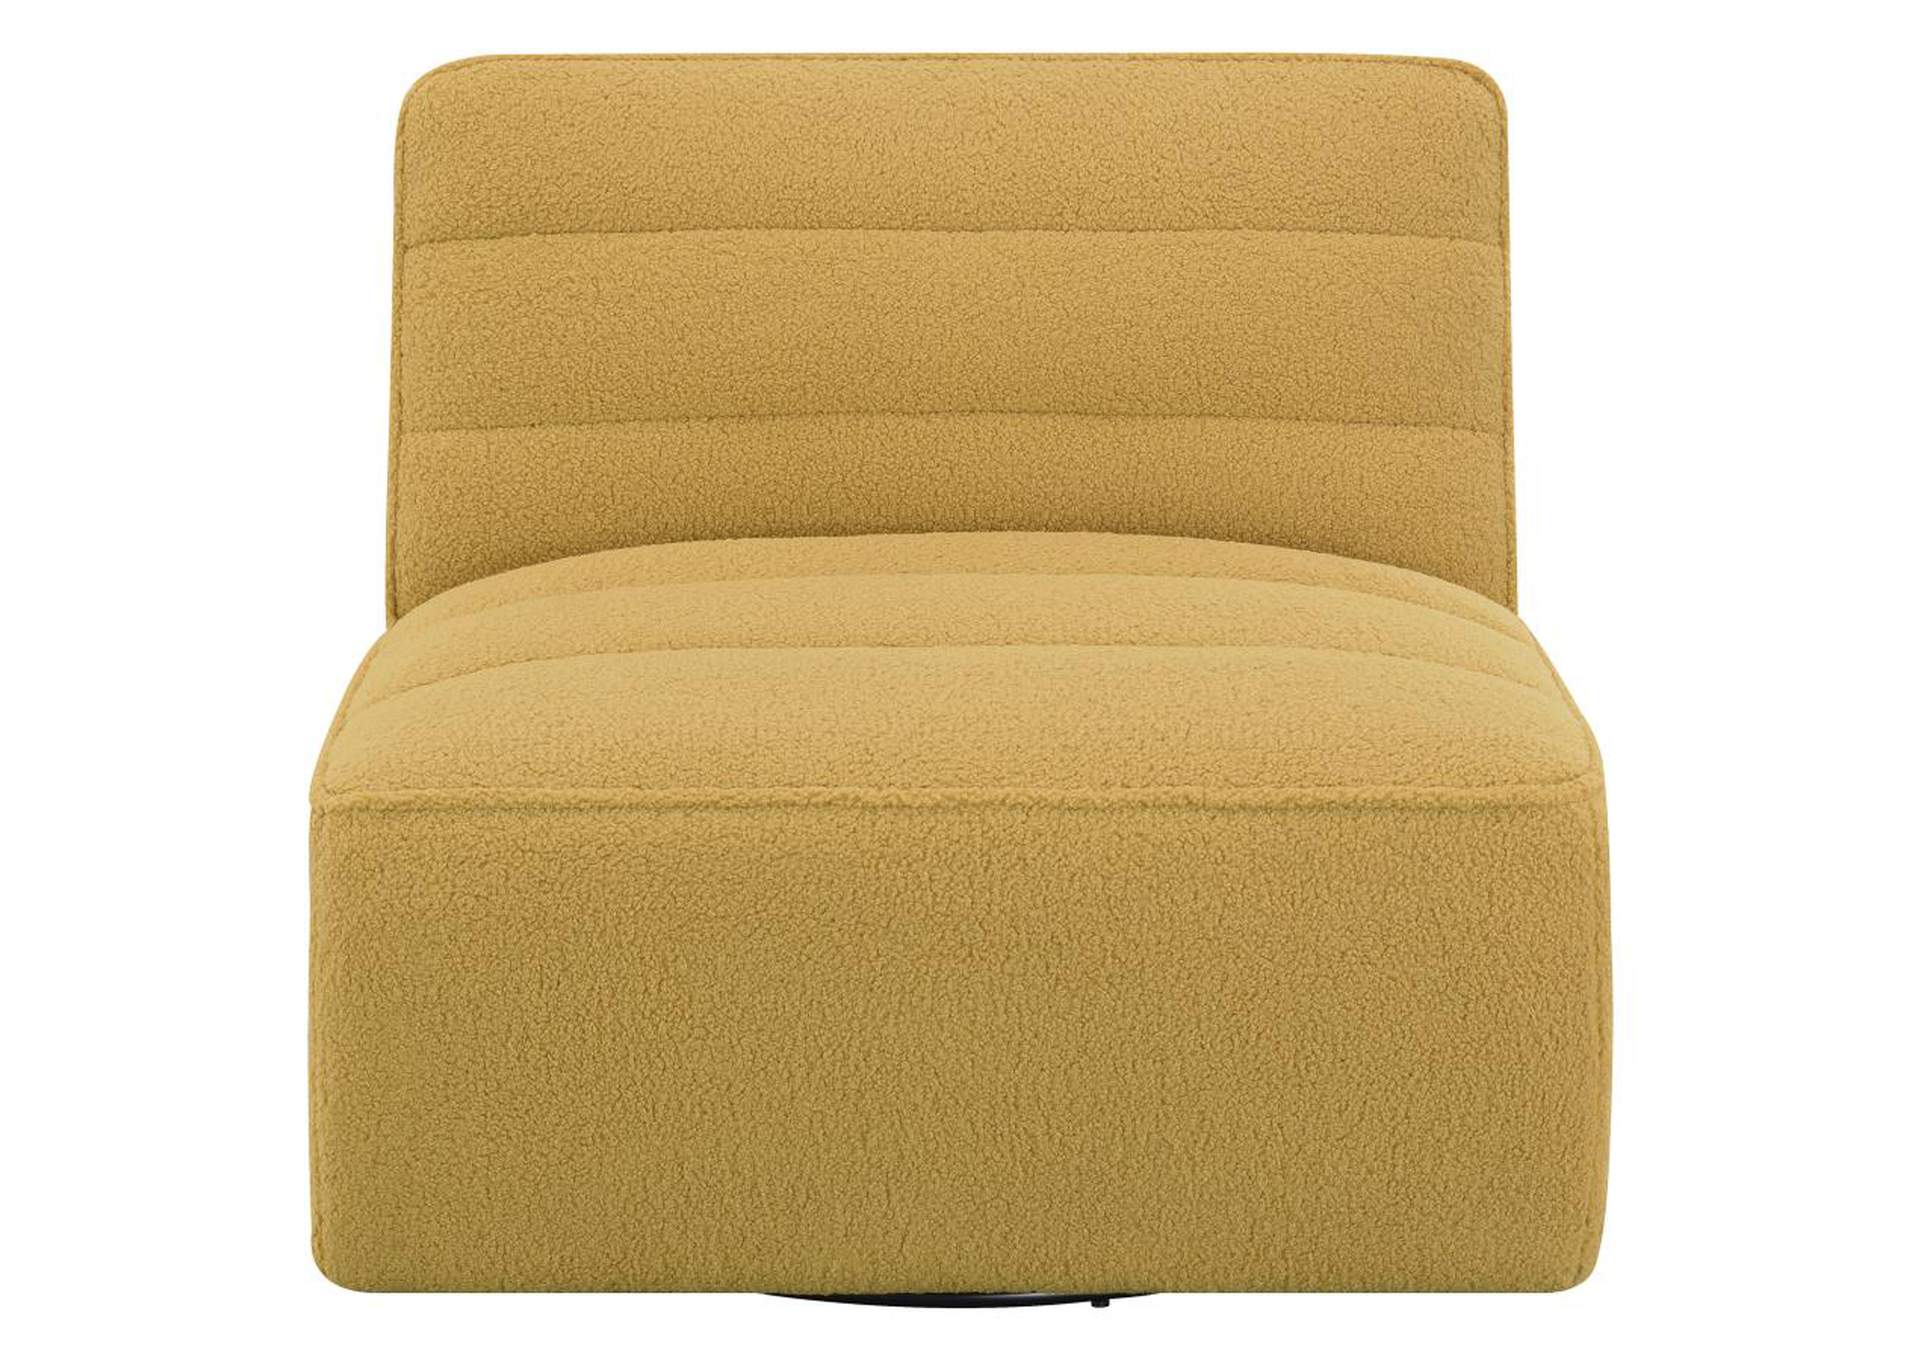 Cobie Upholstered Swivel Armless Chair Mustard,Coaster Furniture